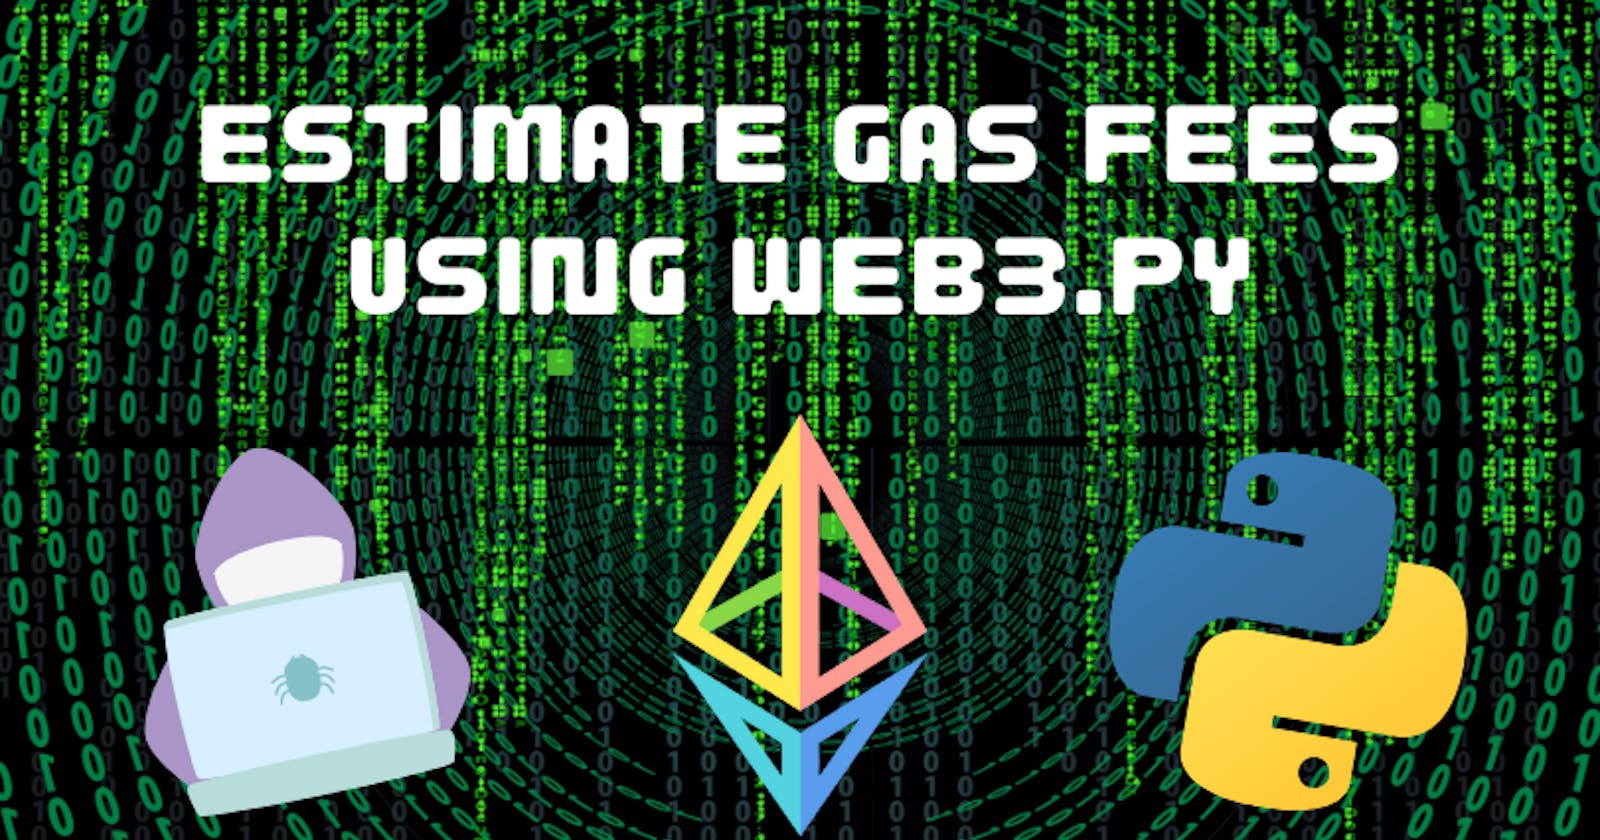 Estimate gas fees with Web3.py